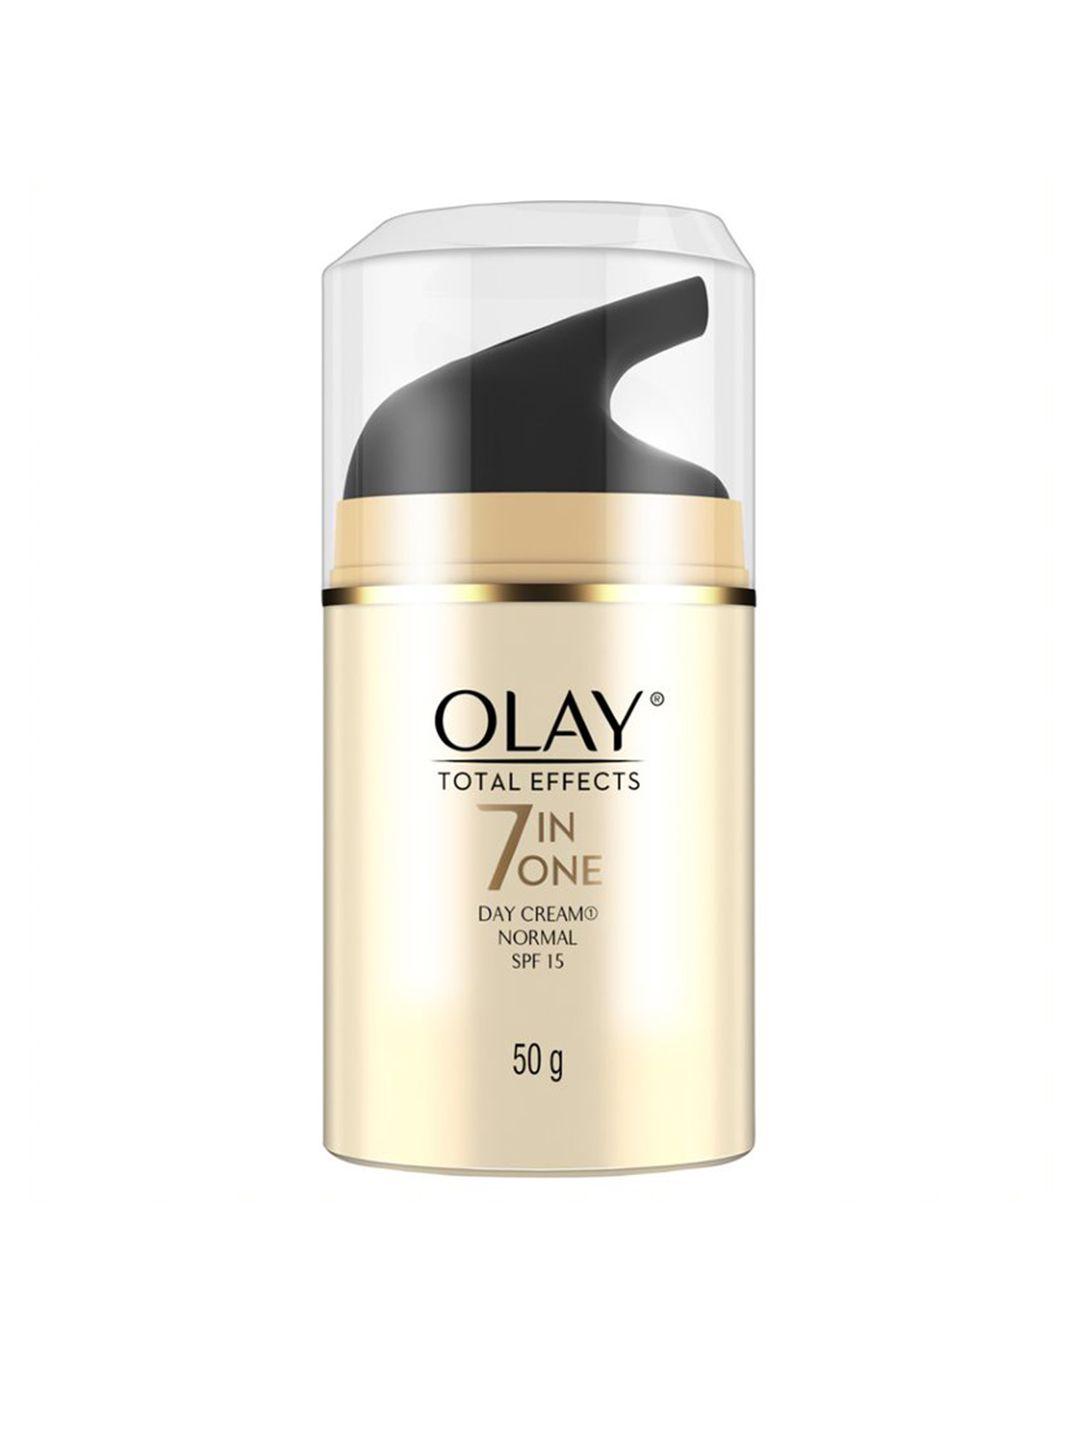 olay total effects 7 in one anti-ageing day cream with spf 15 50g